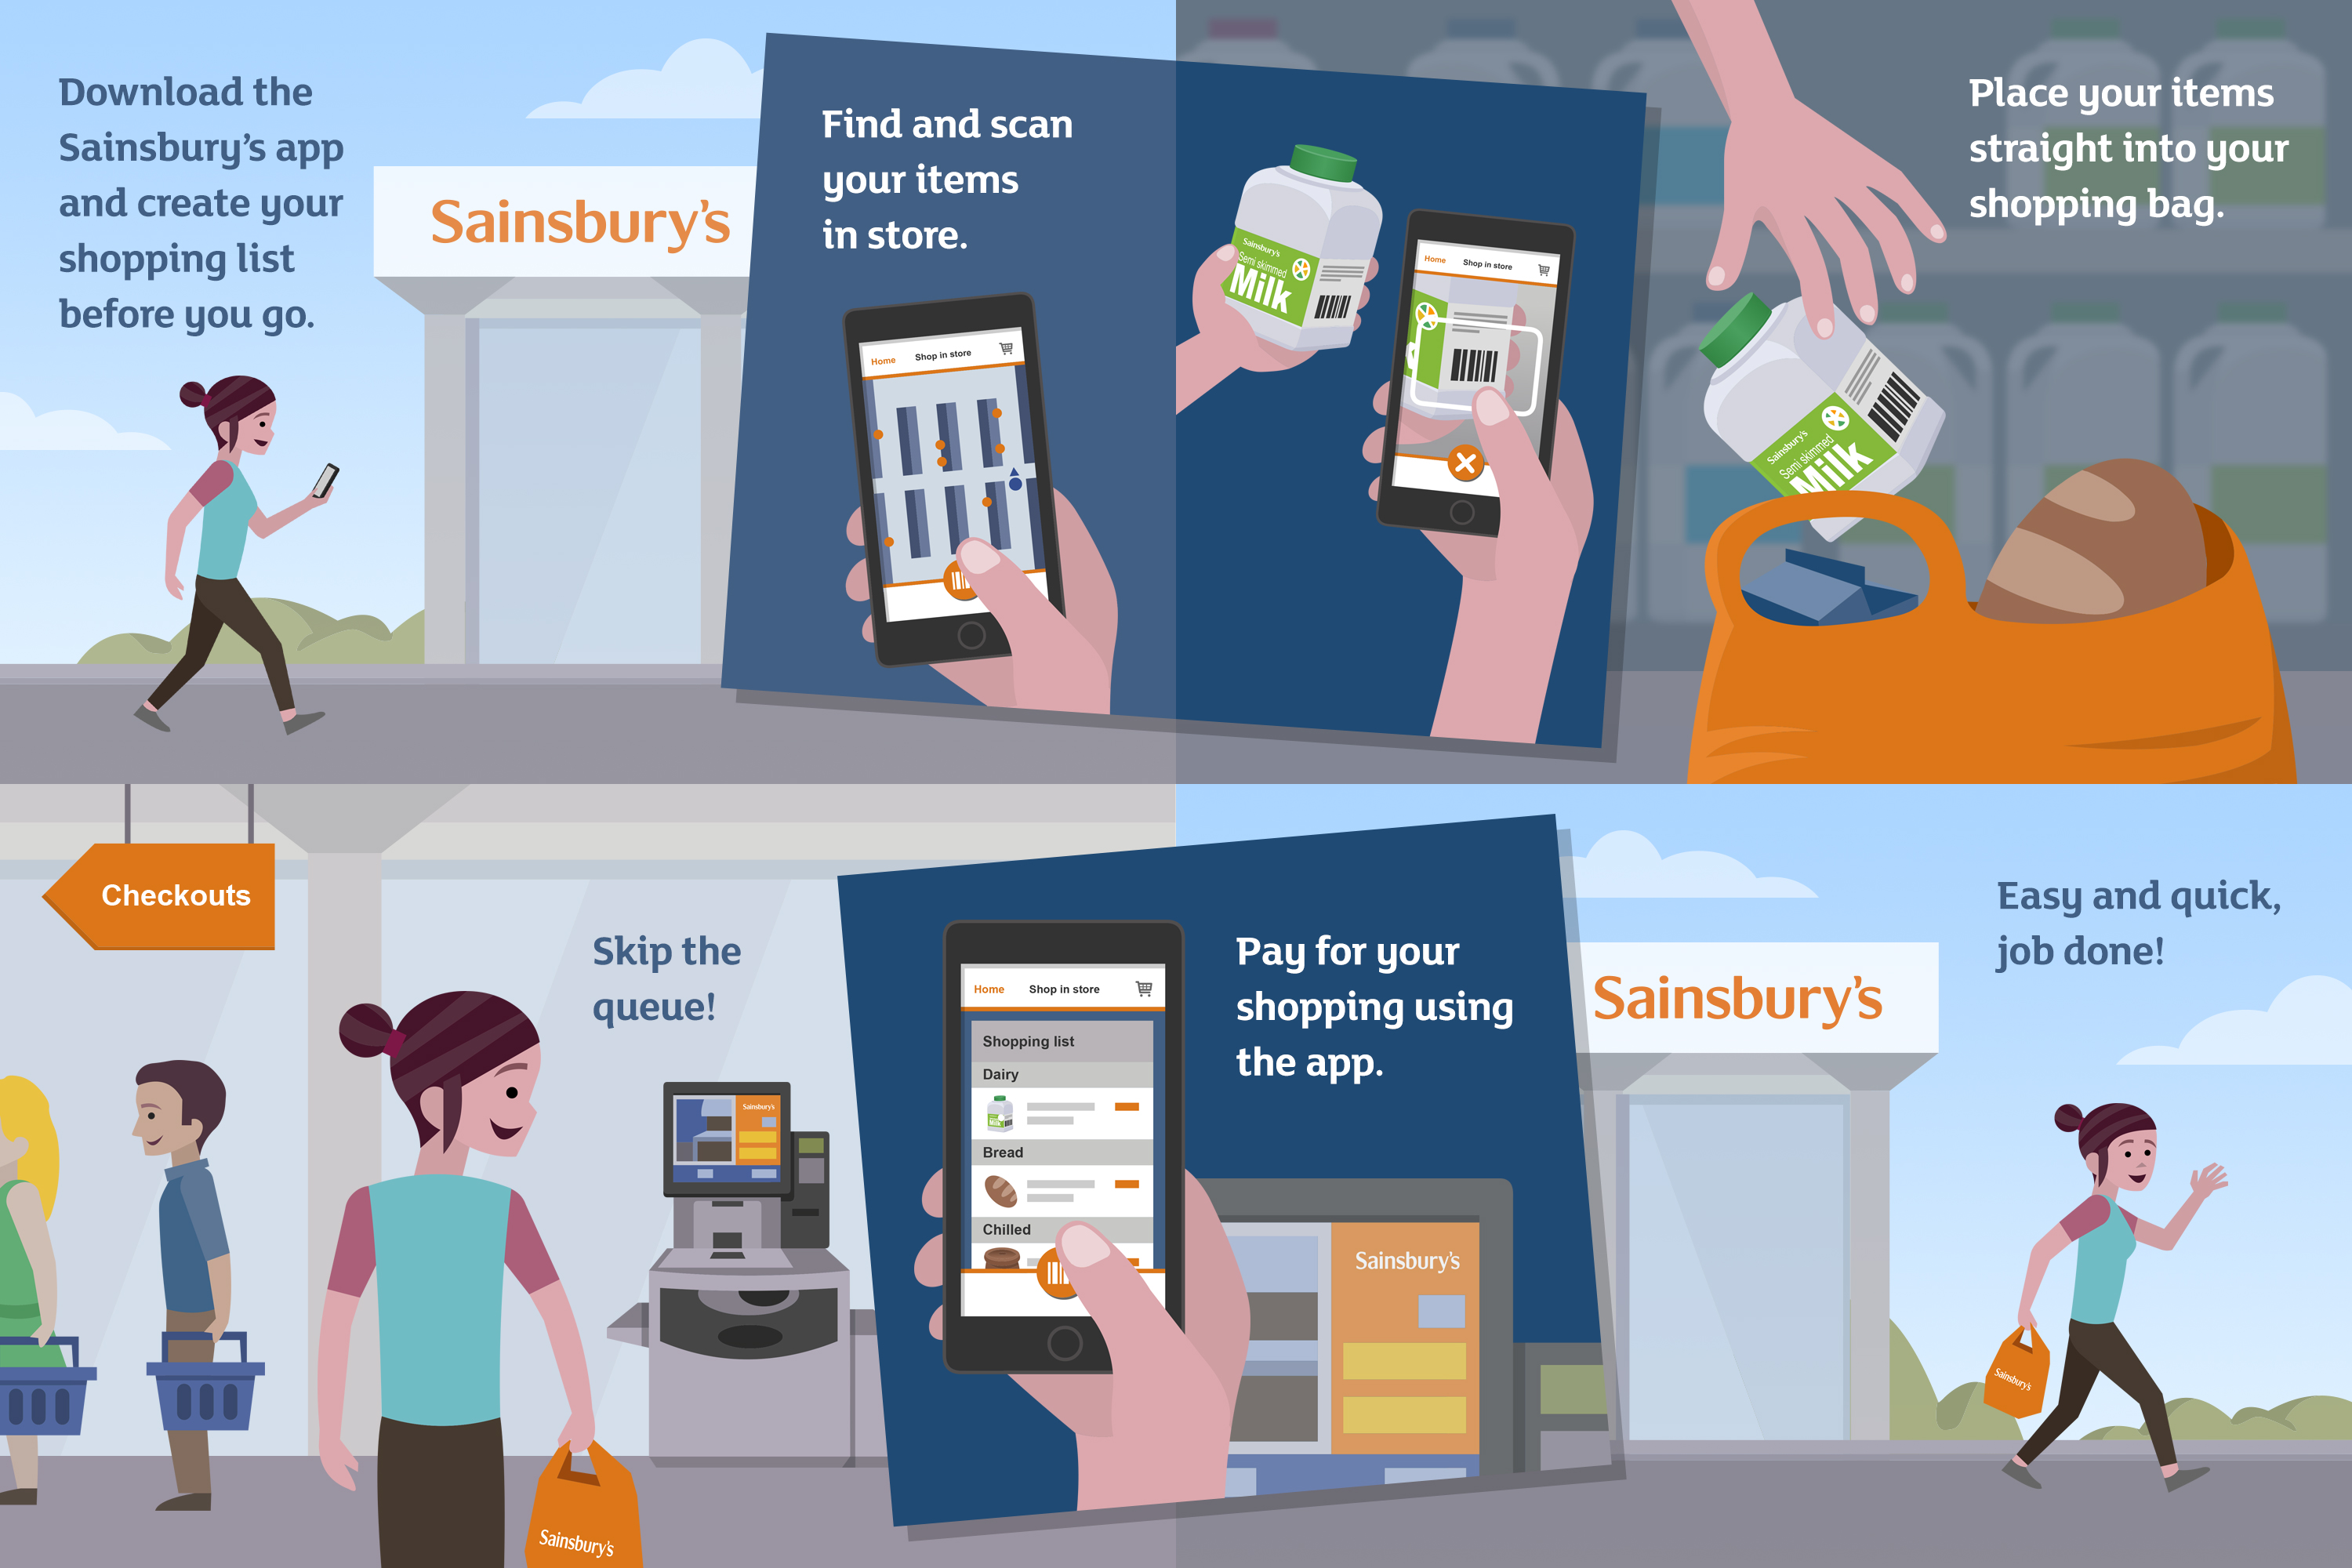 Sainsbury Planning Store Guide and Pay via Mobile App